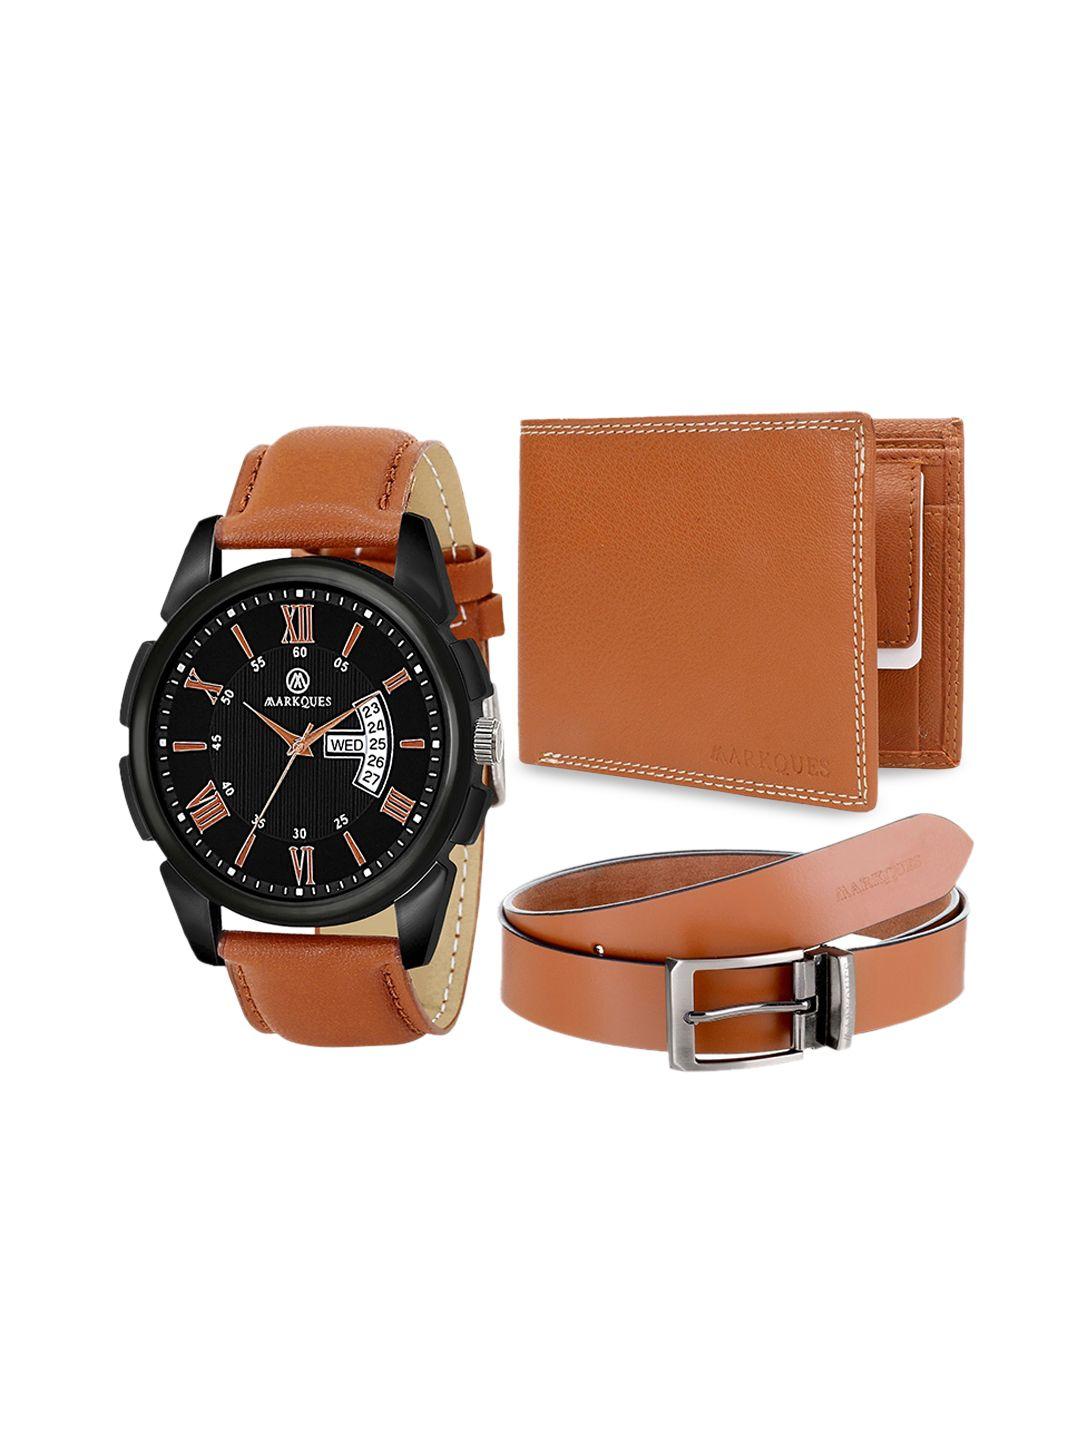 markques men accessory gift set with watch, wallet & belt